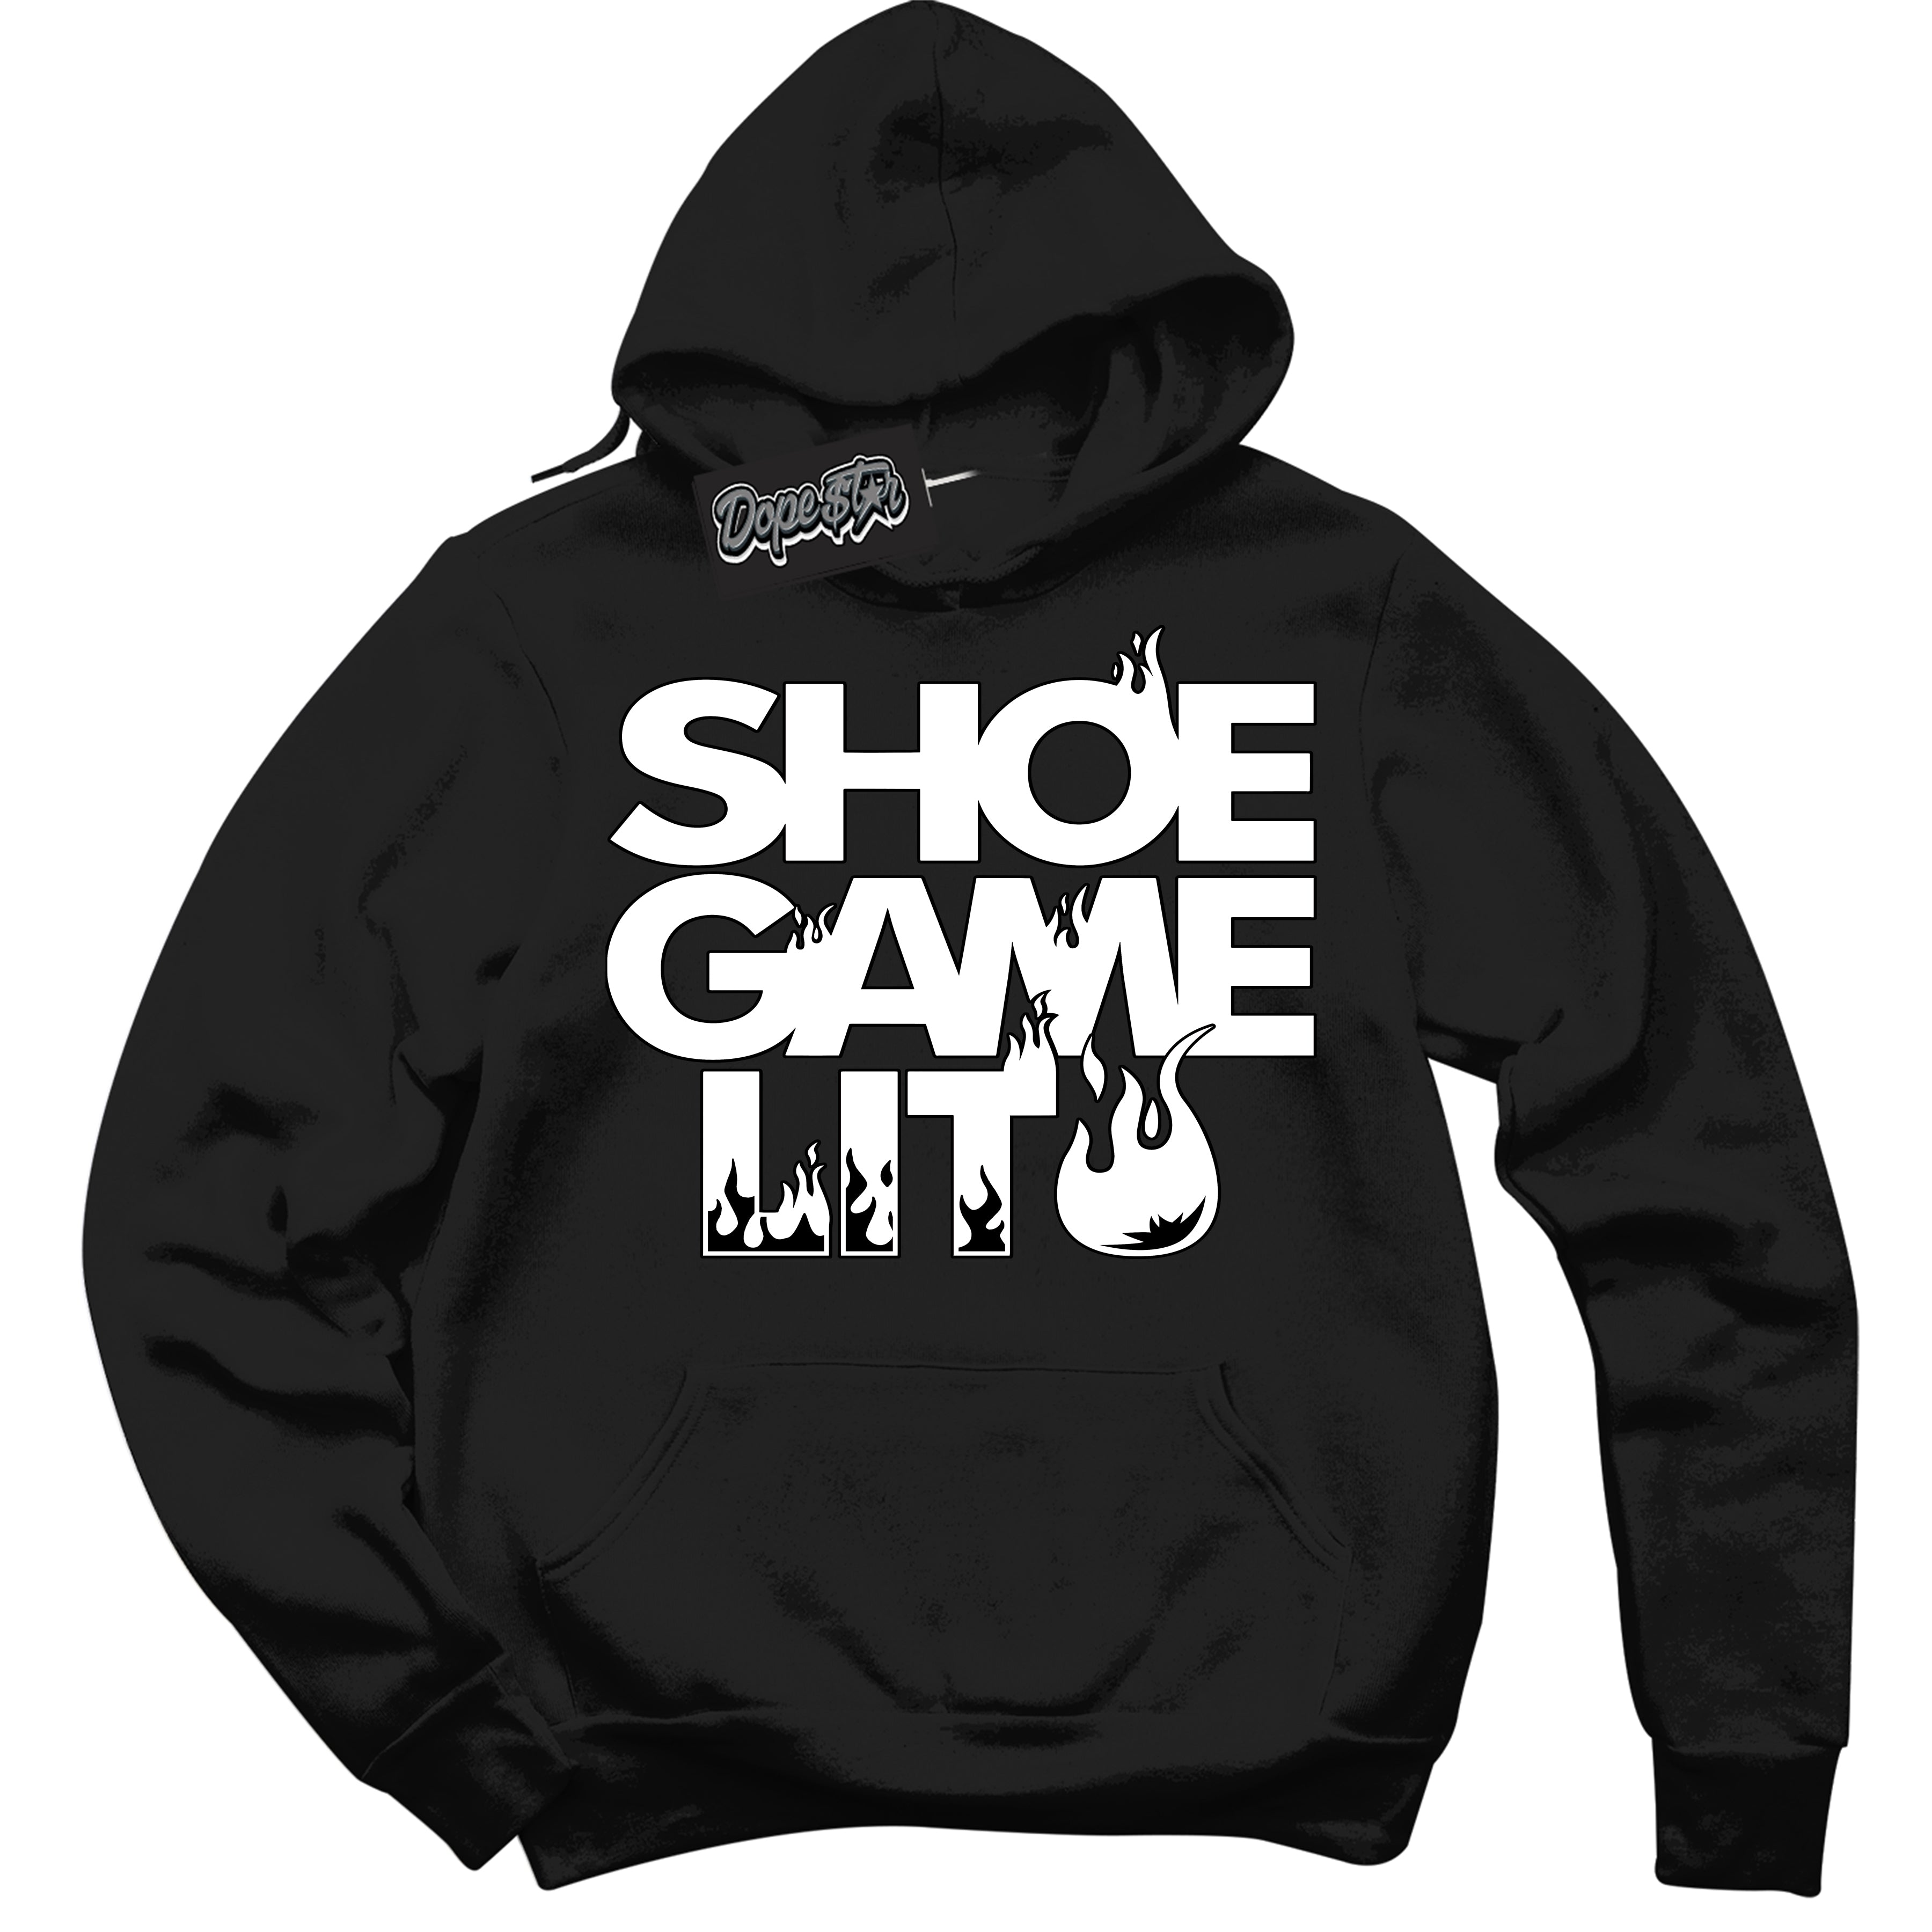 Cool Black Hoodie with “ Shoe Game Lit '' design that Perfectly Matches  '85 Black White 1s Sneakers.